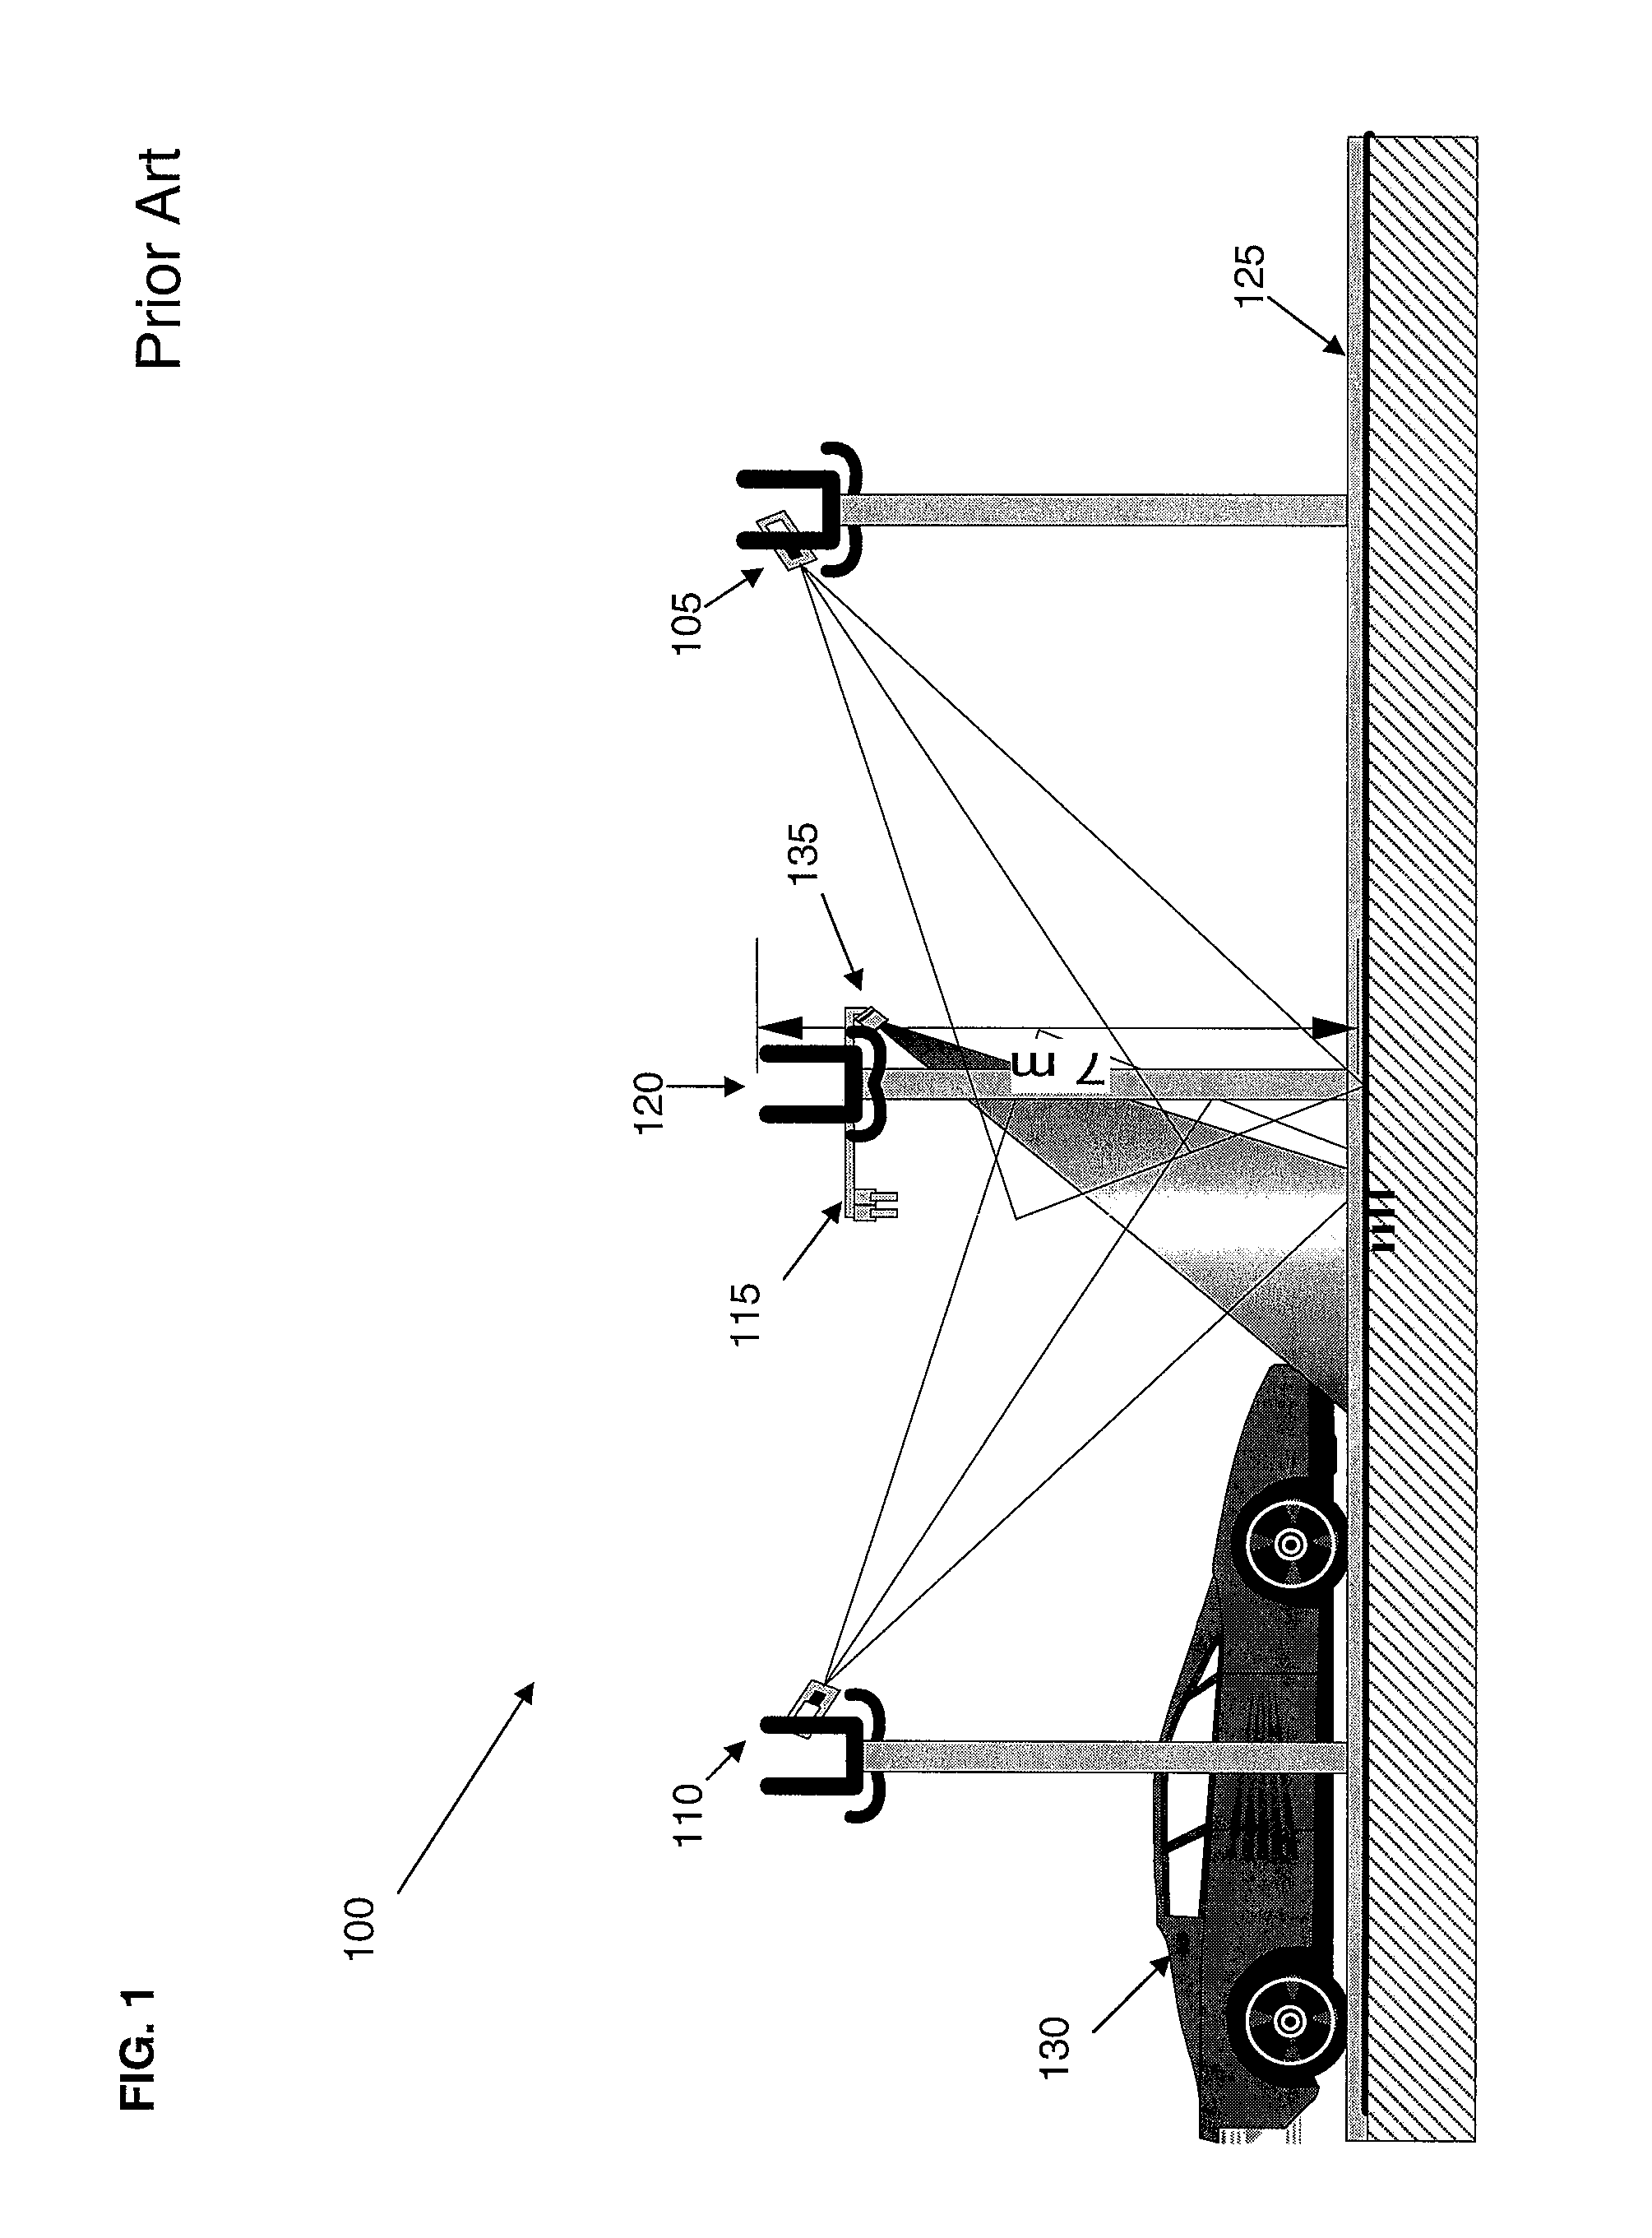 Method and system for analyzing image identifications to identify an entity